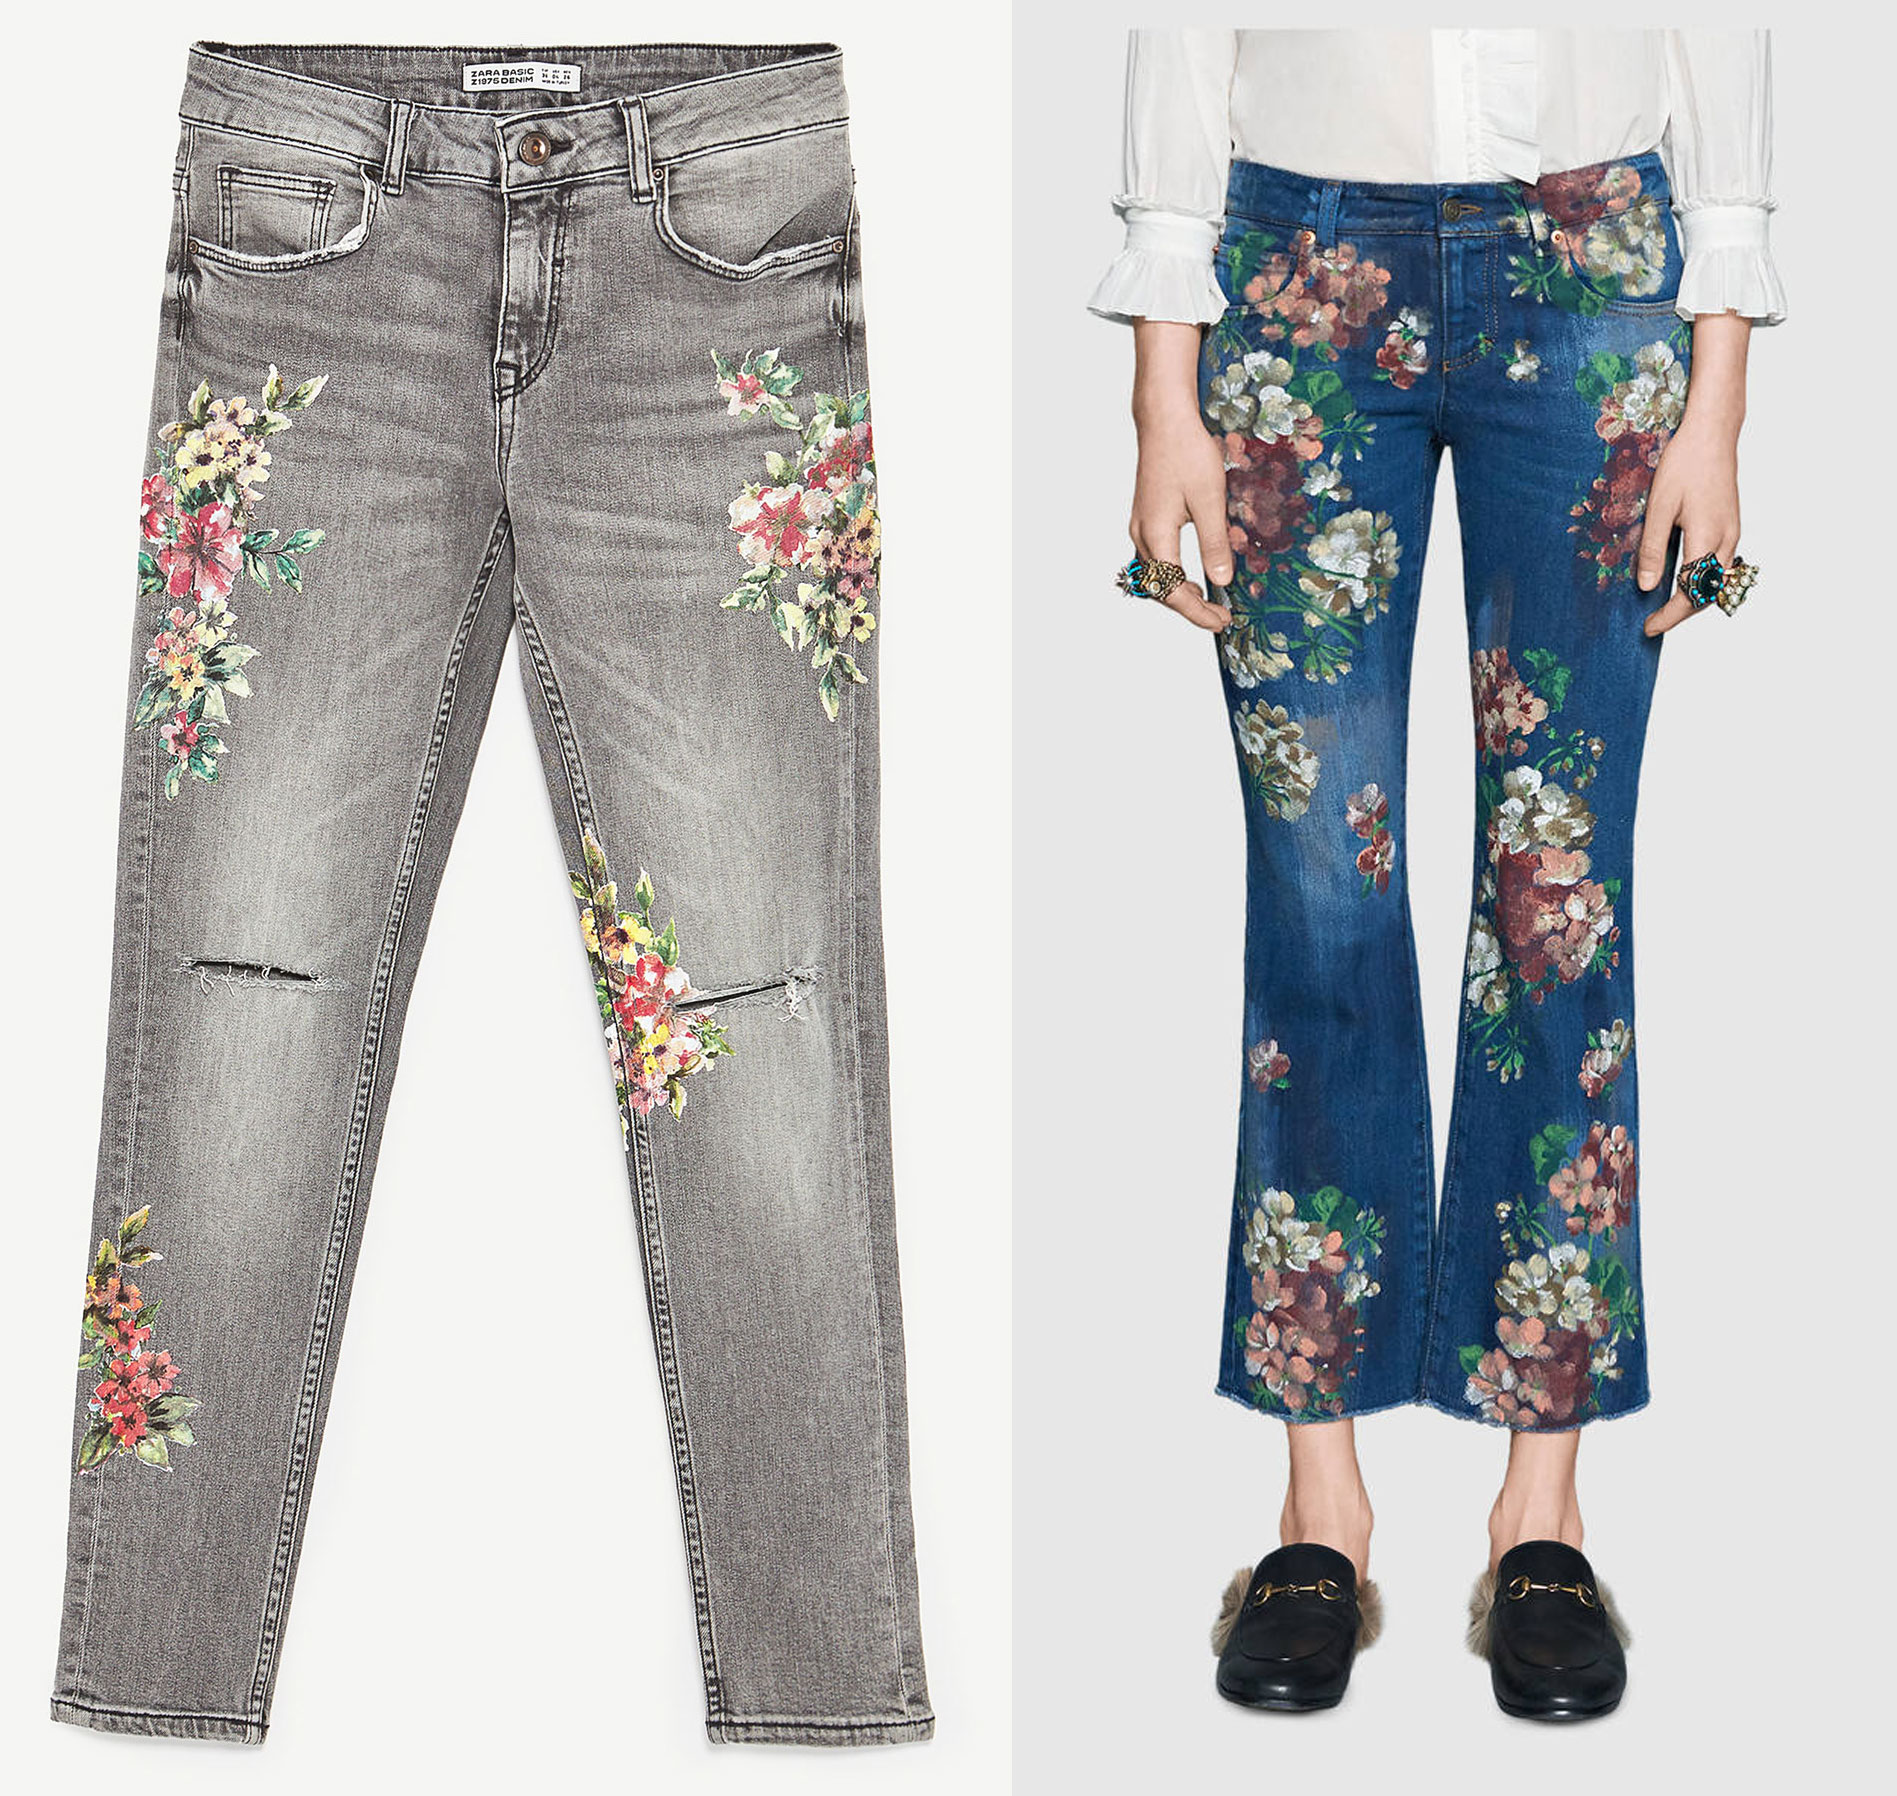 DIY jeans - Painted jeans - Jeans DIY - Painted on jeans